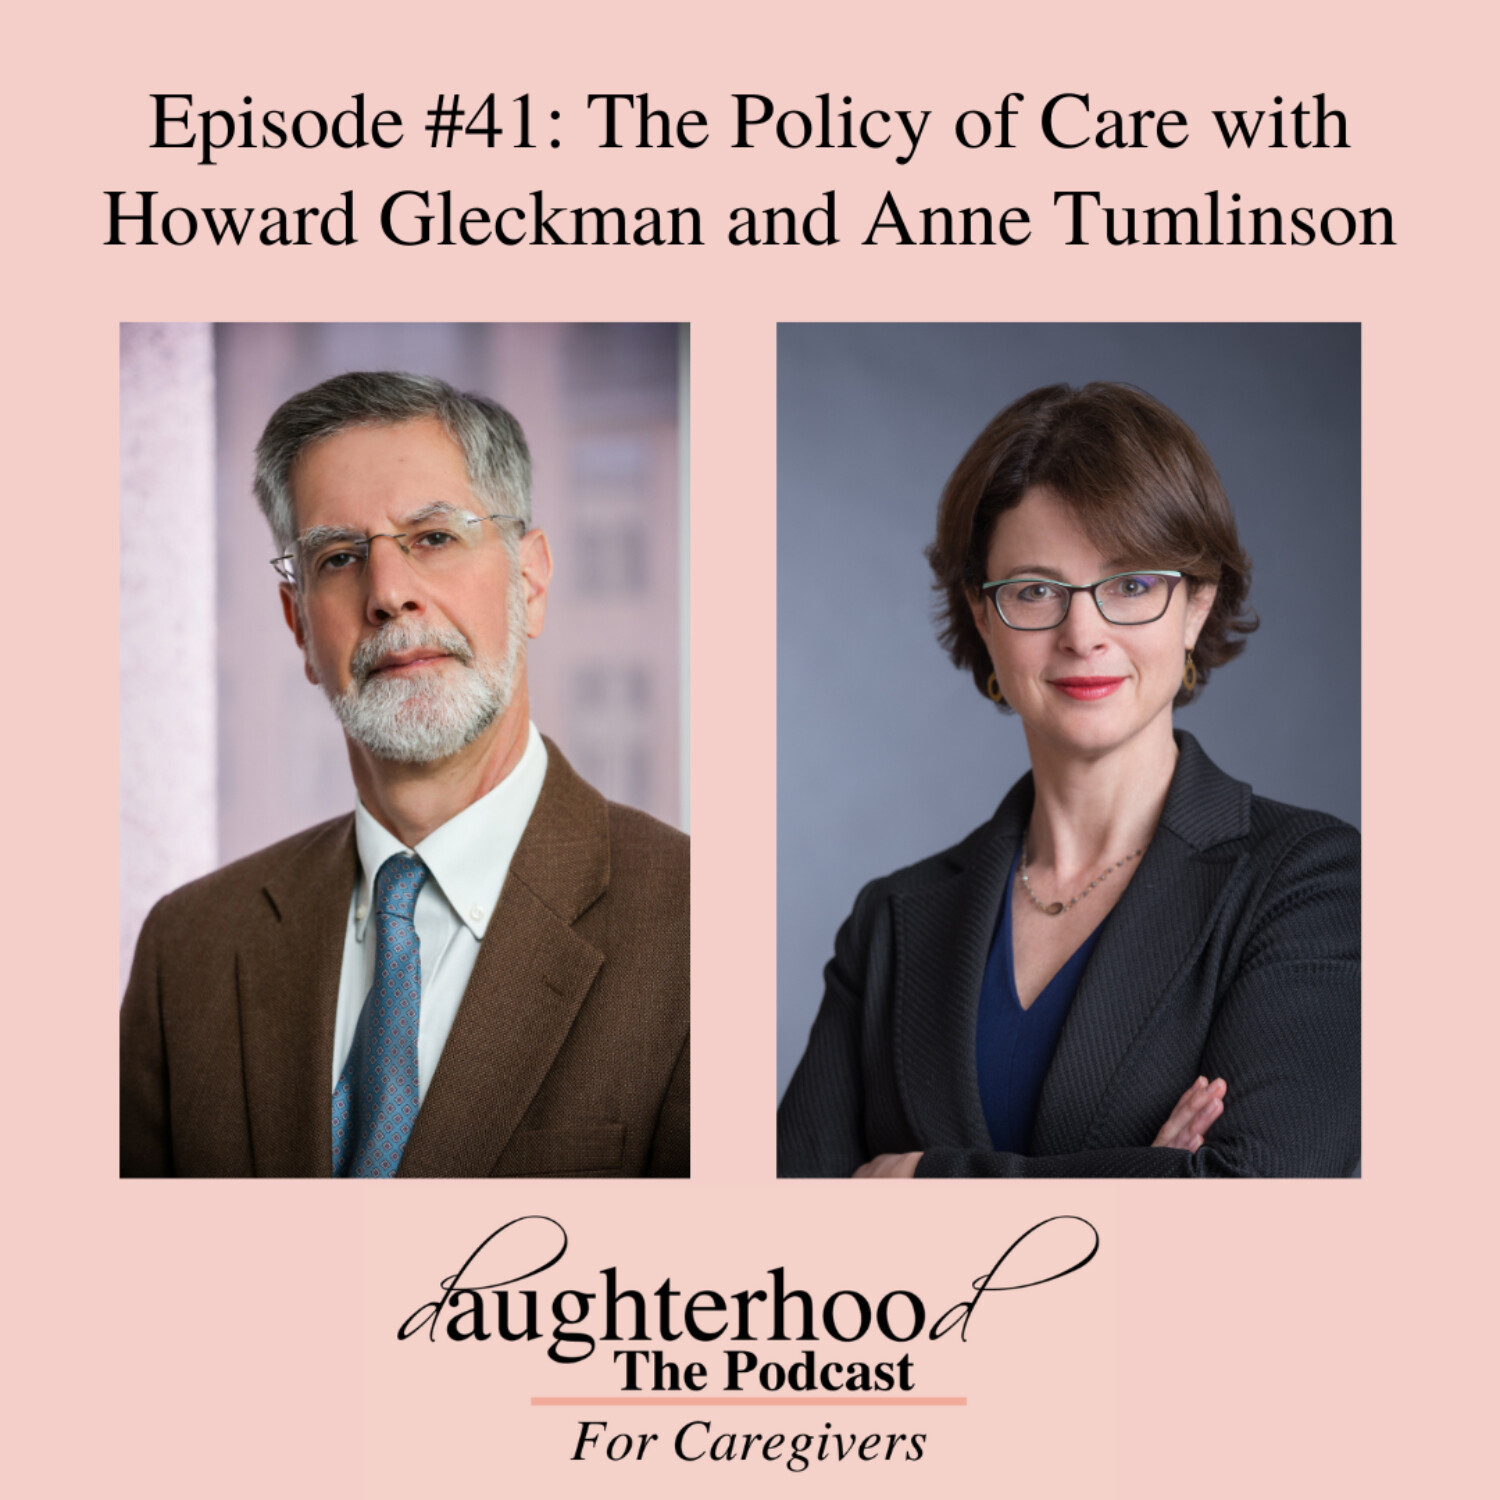 The Policy of Care with Howard Gleckman and Anne Tumlinson